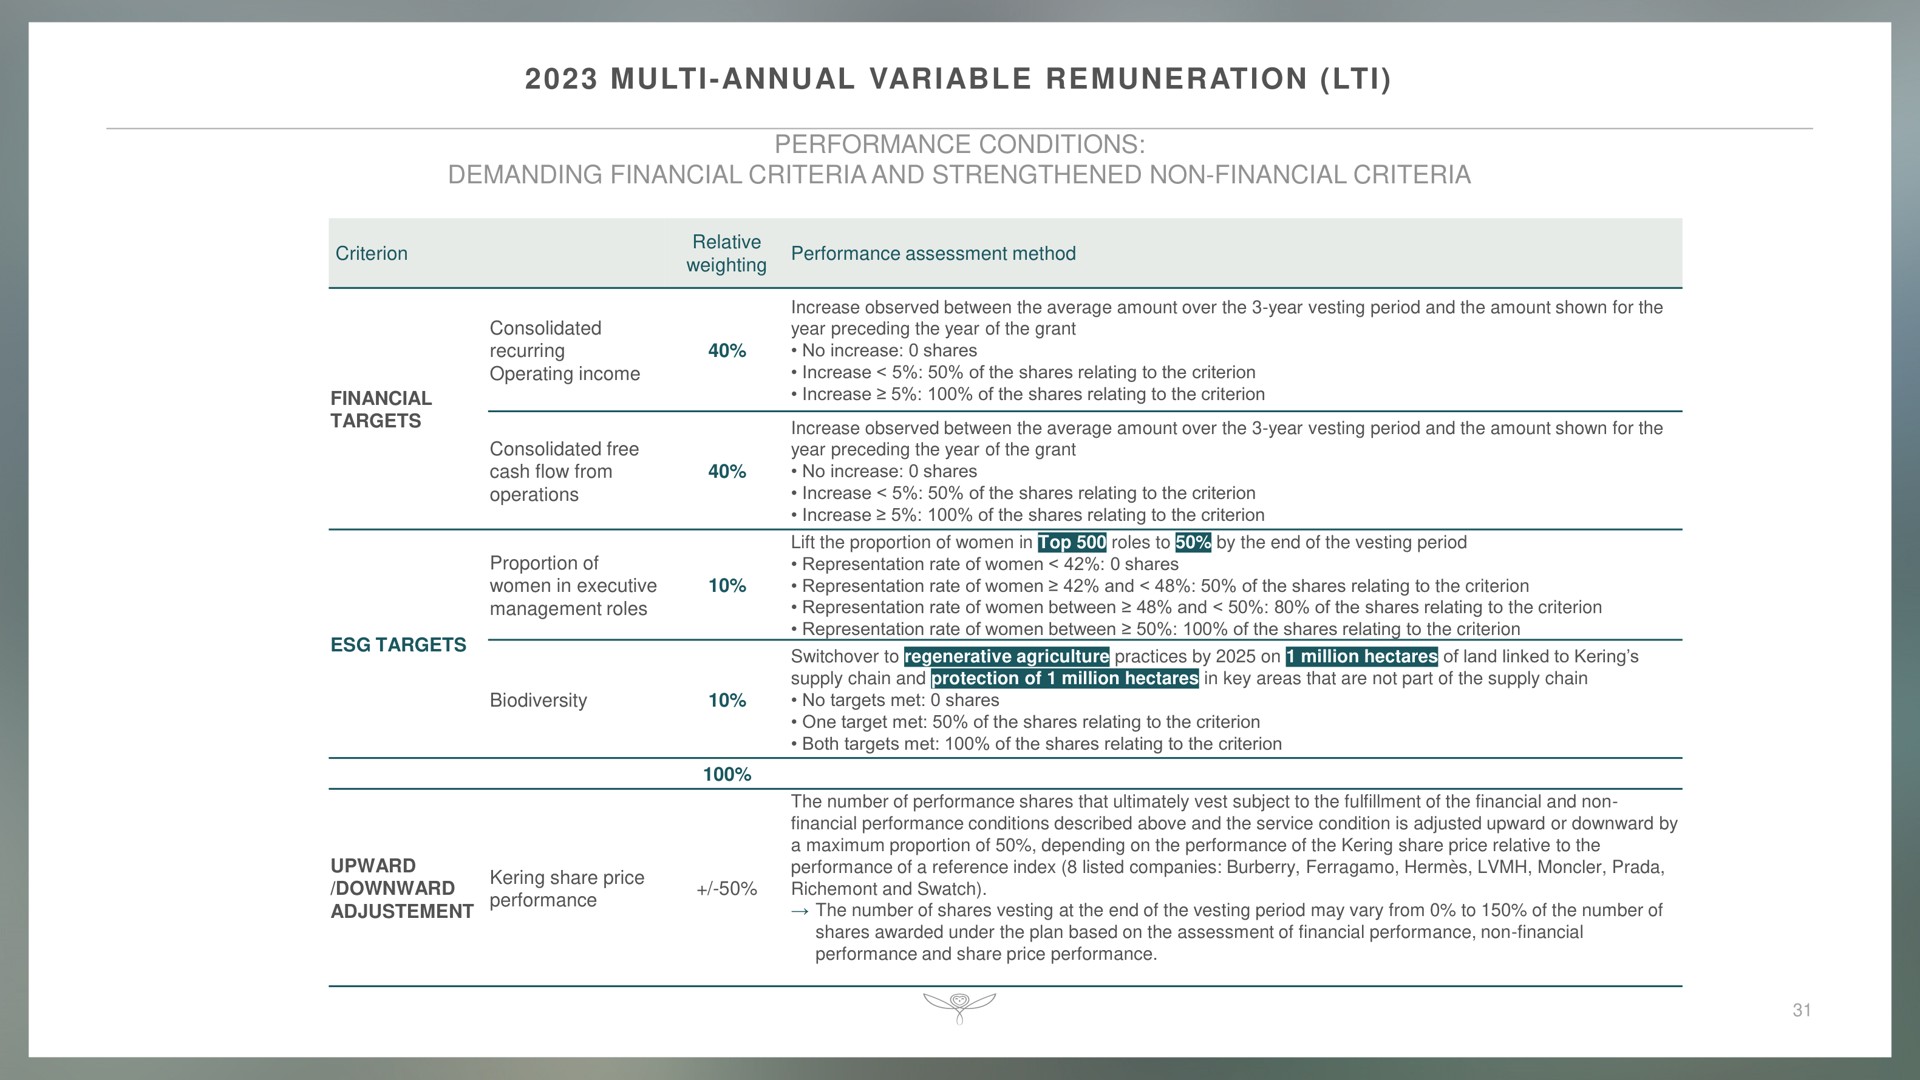 annual variable remuneration performance conditions demanding financial criteria and strengthened non financial criteria | Kering